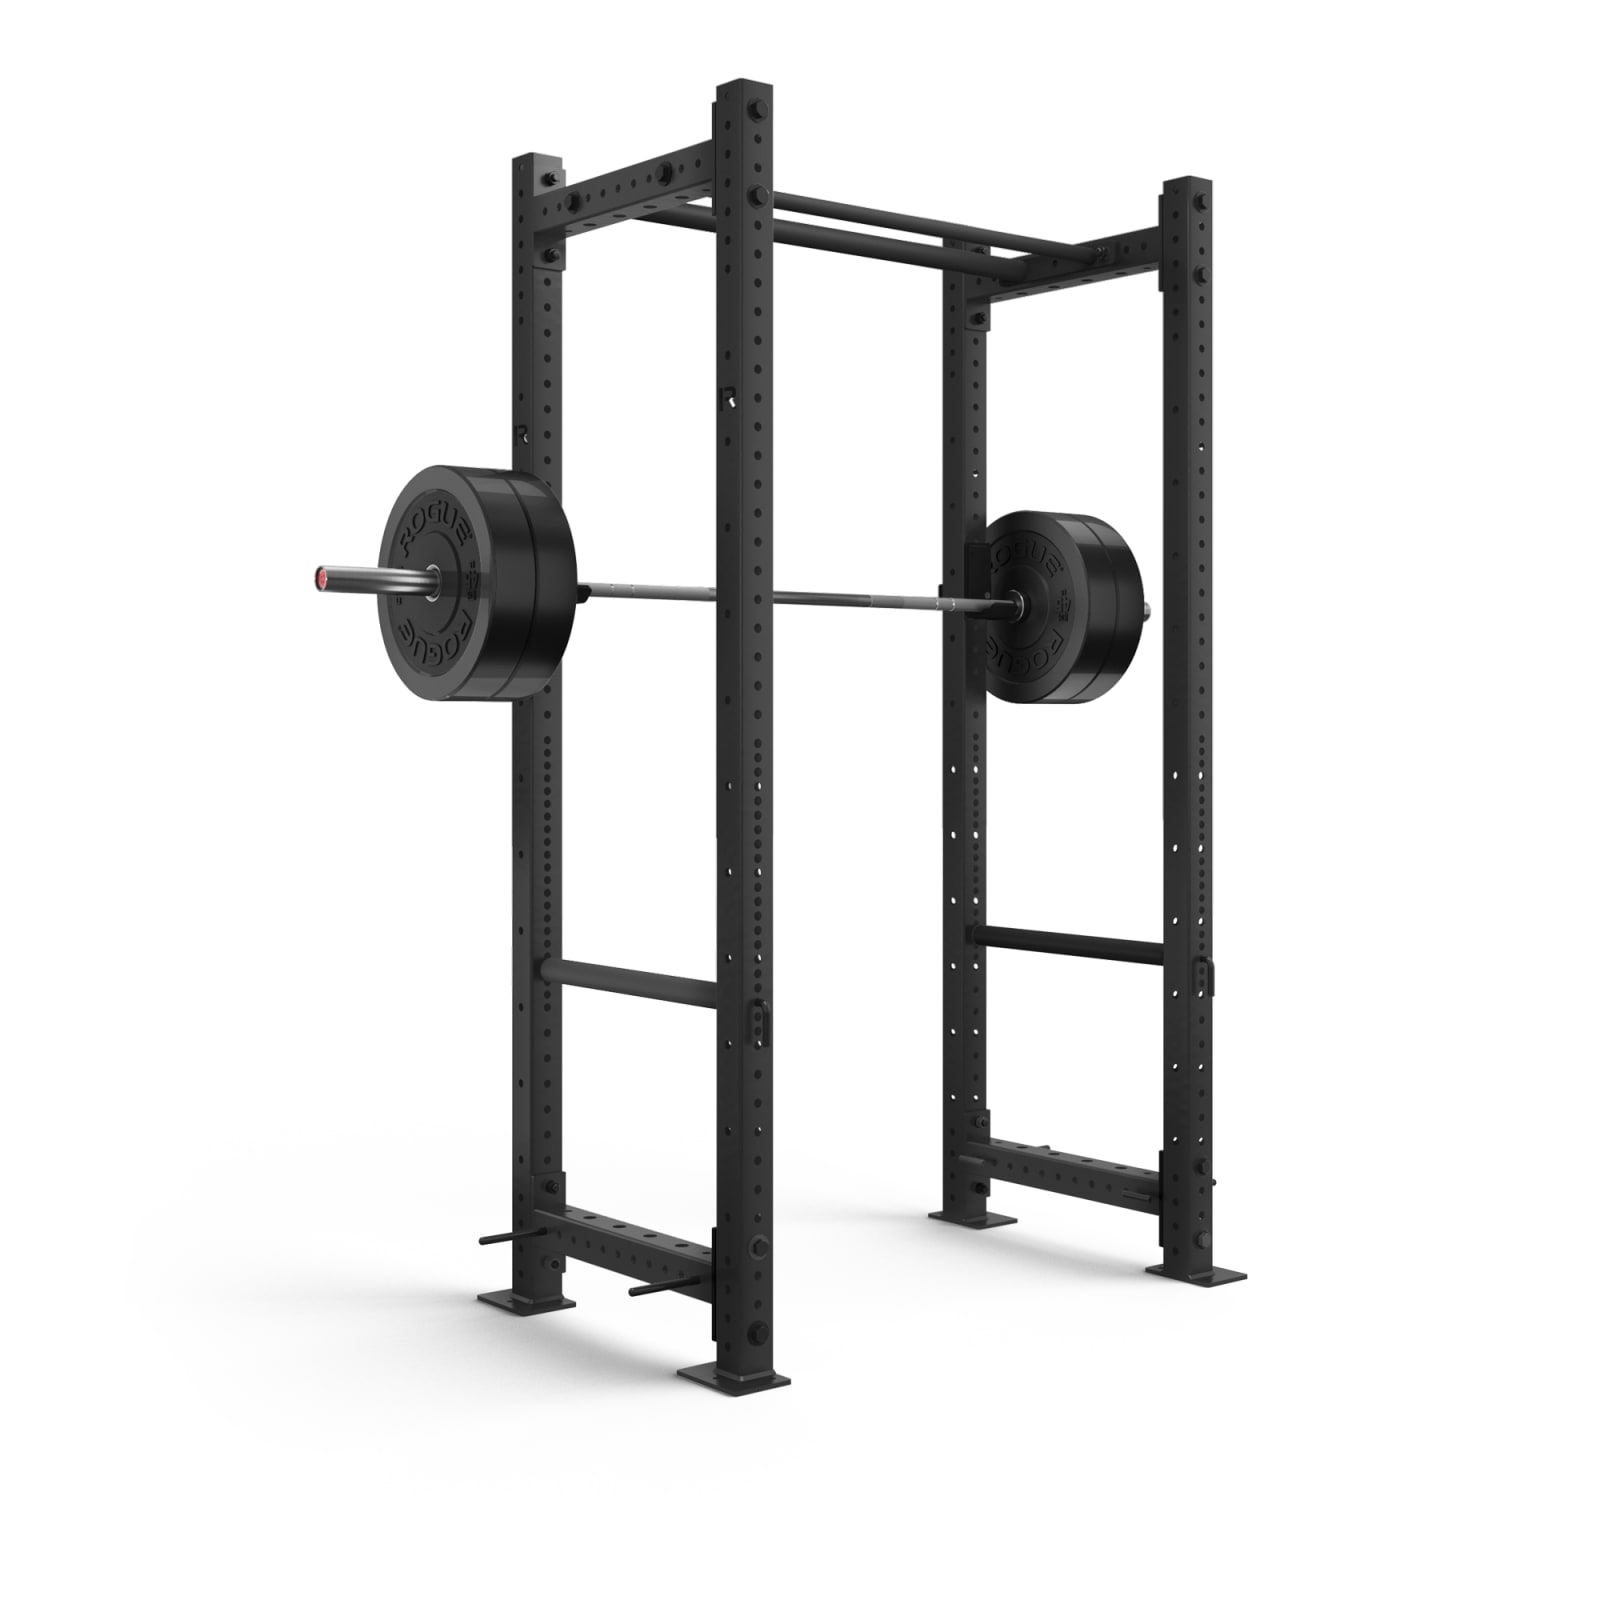 T-2 Series Power Rack - All In One Home Garage Gym for Weightlifting and  Strength Training - Includes Skinny Pull Up Bar, Pin and Pipe Safeties, and  Standard J-Hooks